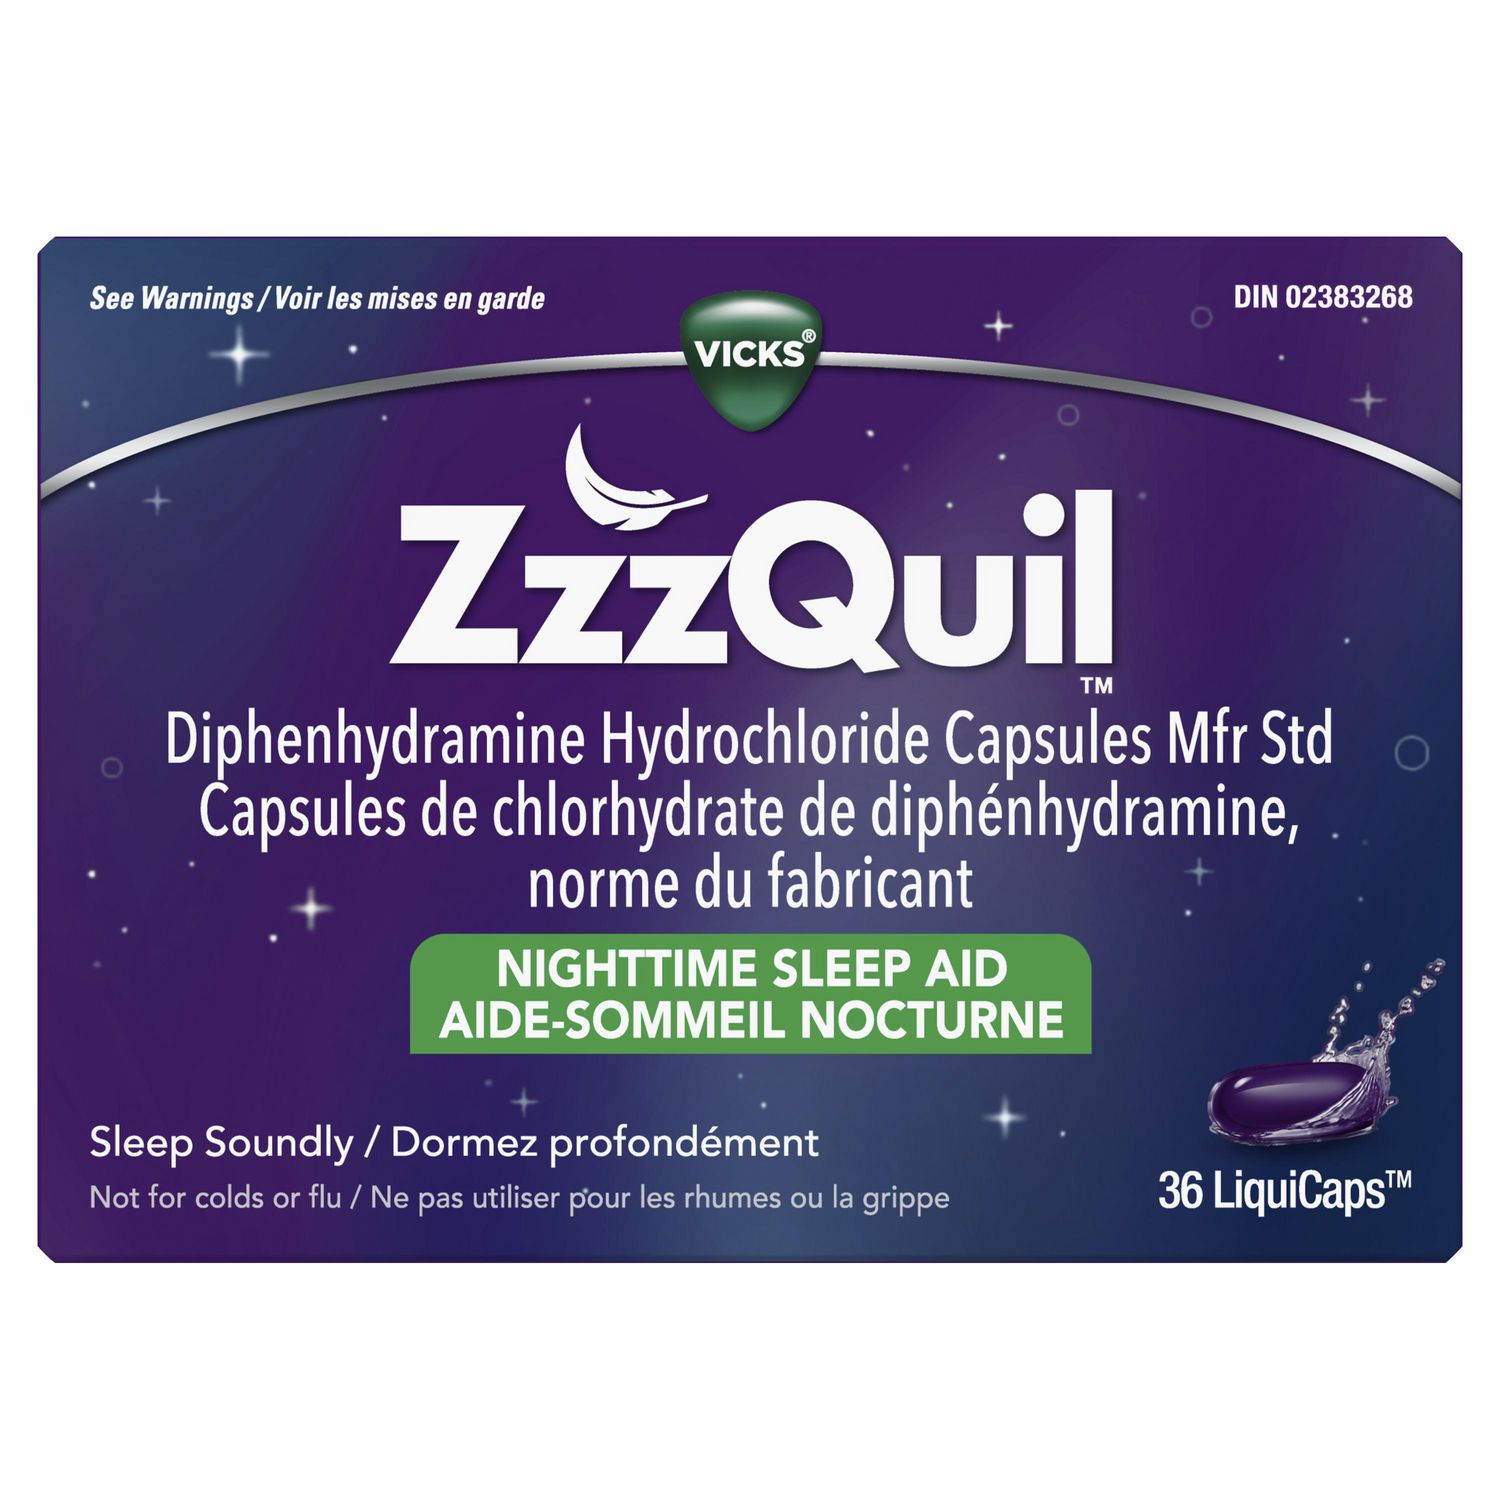 Aide-sommeil